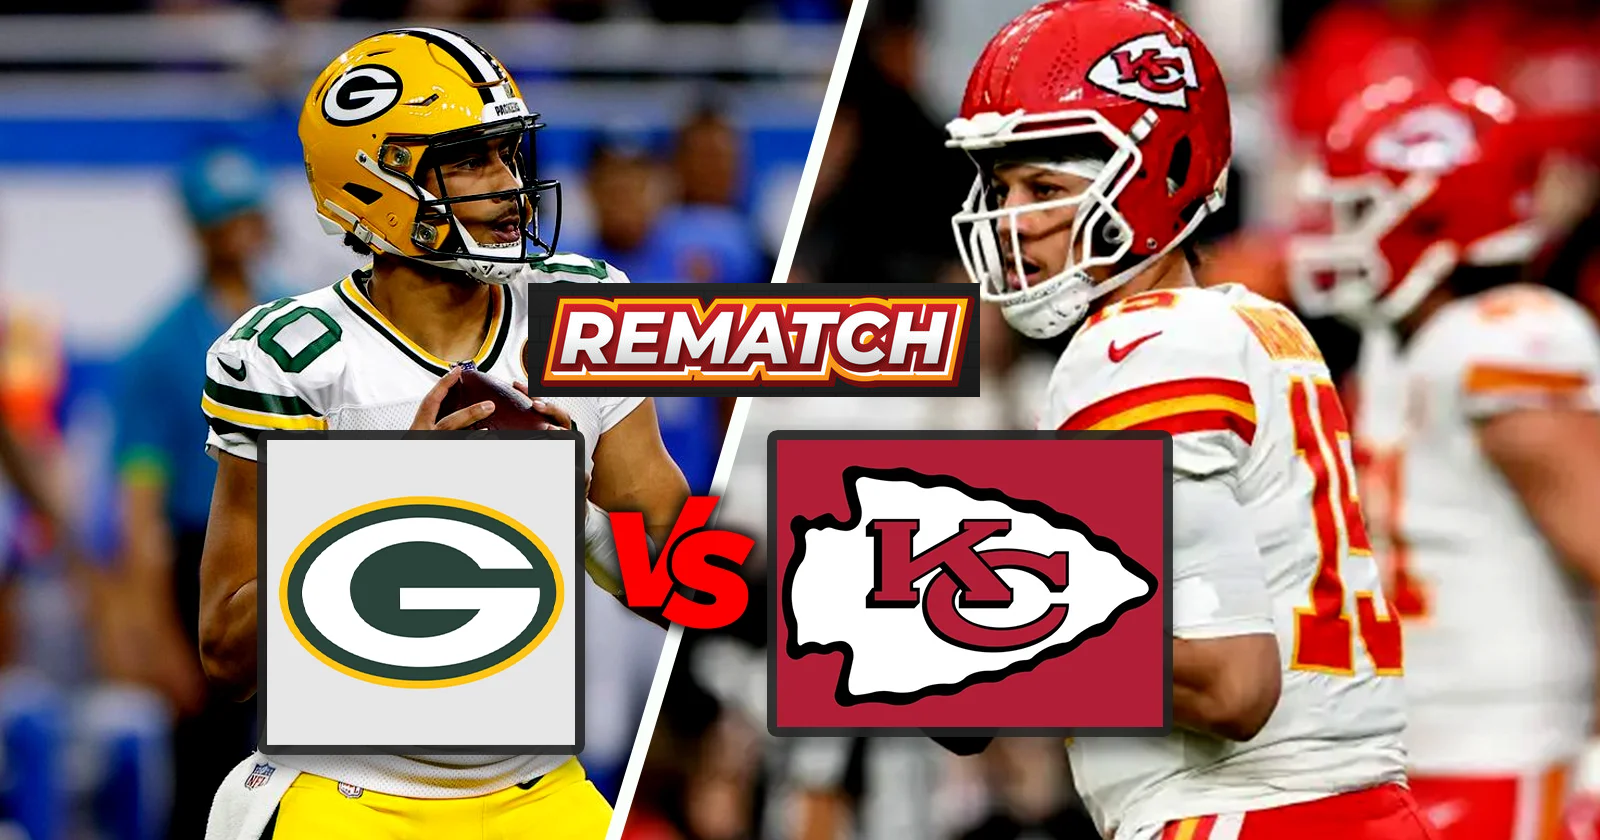 "NFL Responds to Fan Fury: Exclusive Rematch Set for Chiefs vs. Packers Showdown!